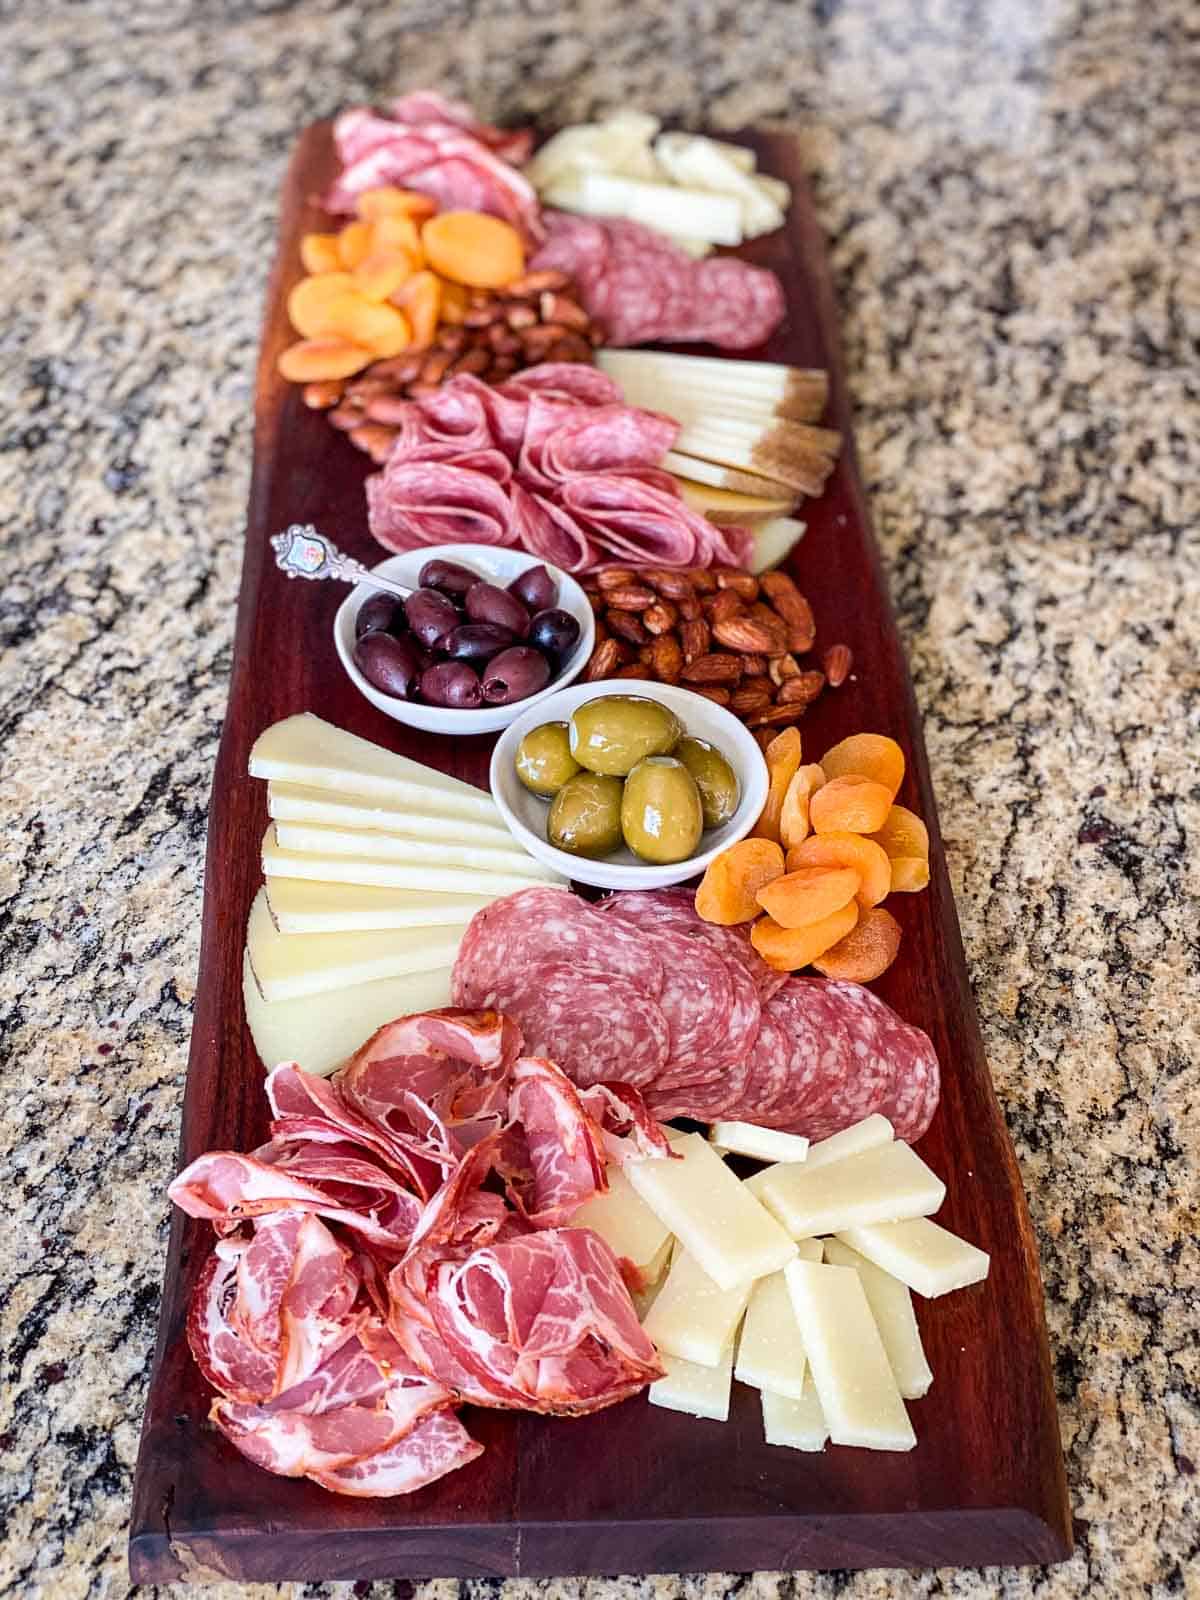 Charcuterie board full of a variety of meats, cheeses, and nibbles.